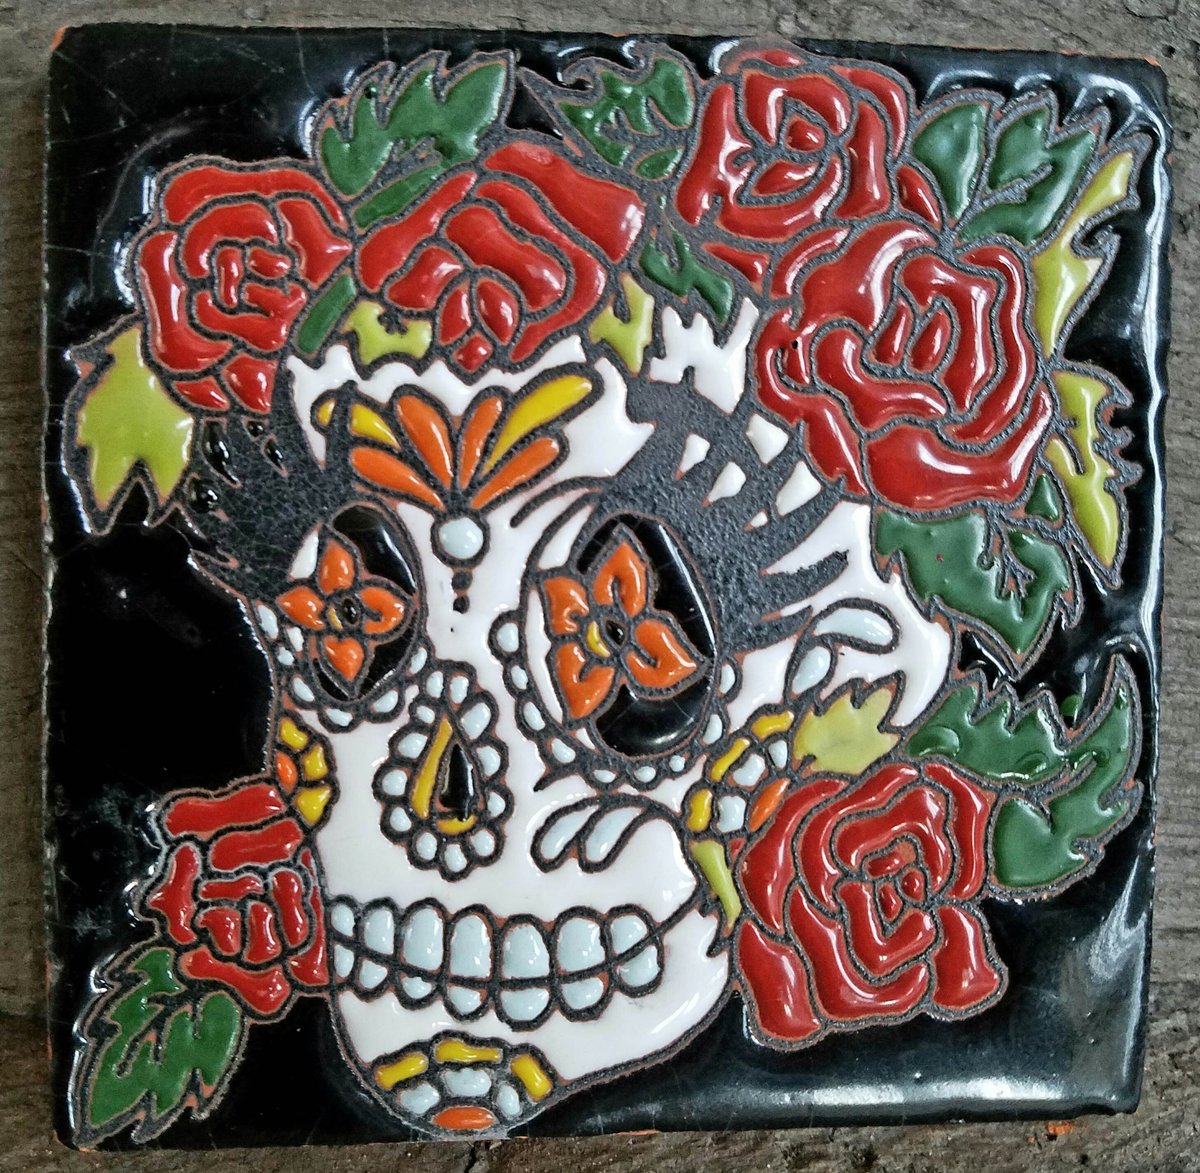 Image of Skull With Roses Coaster Tiles